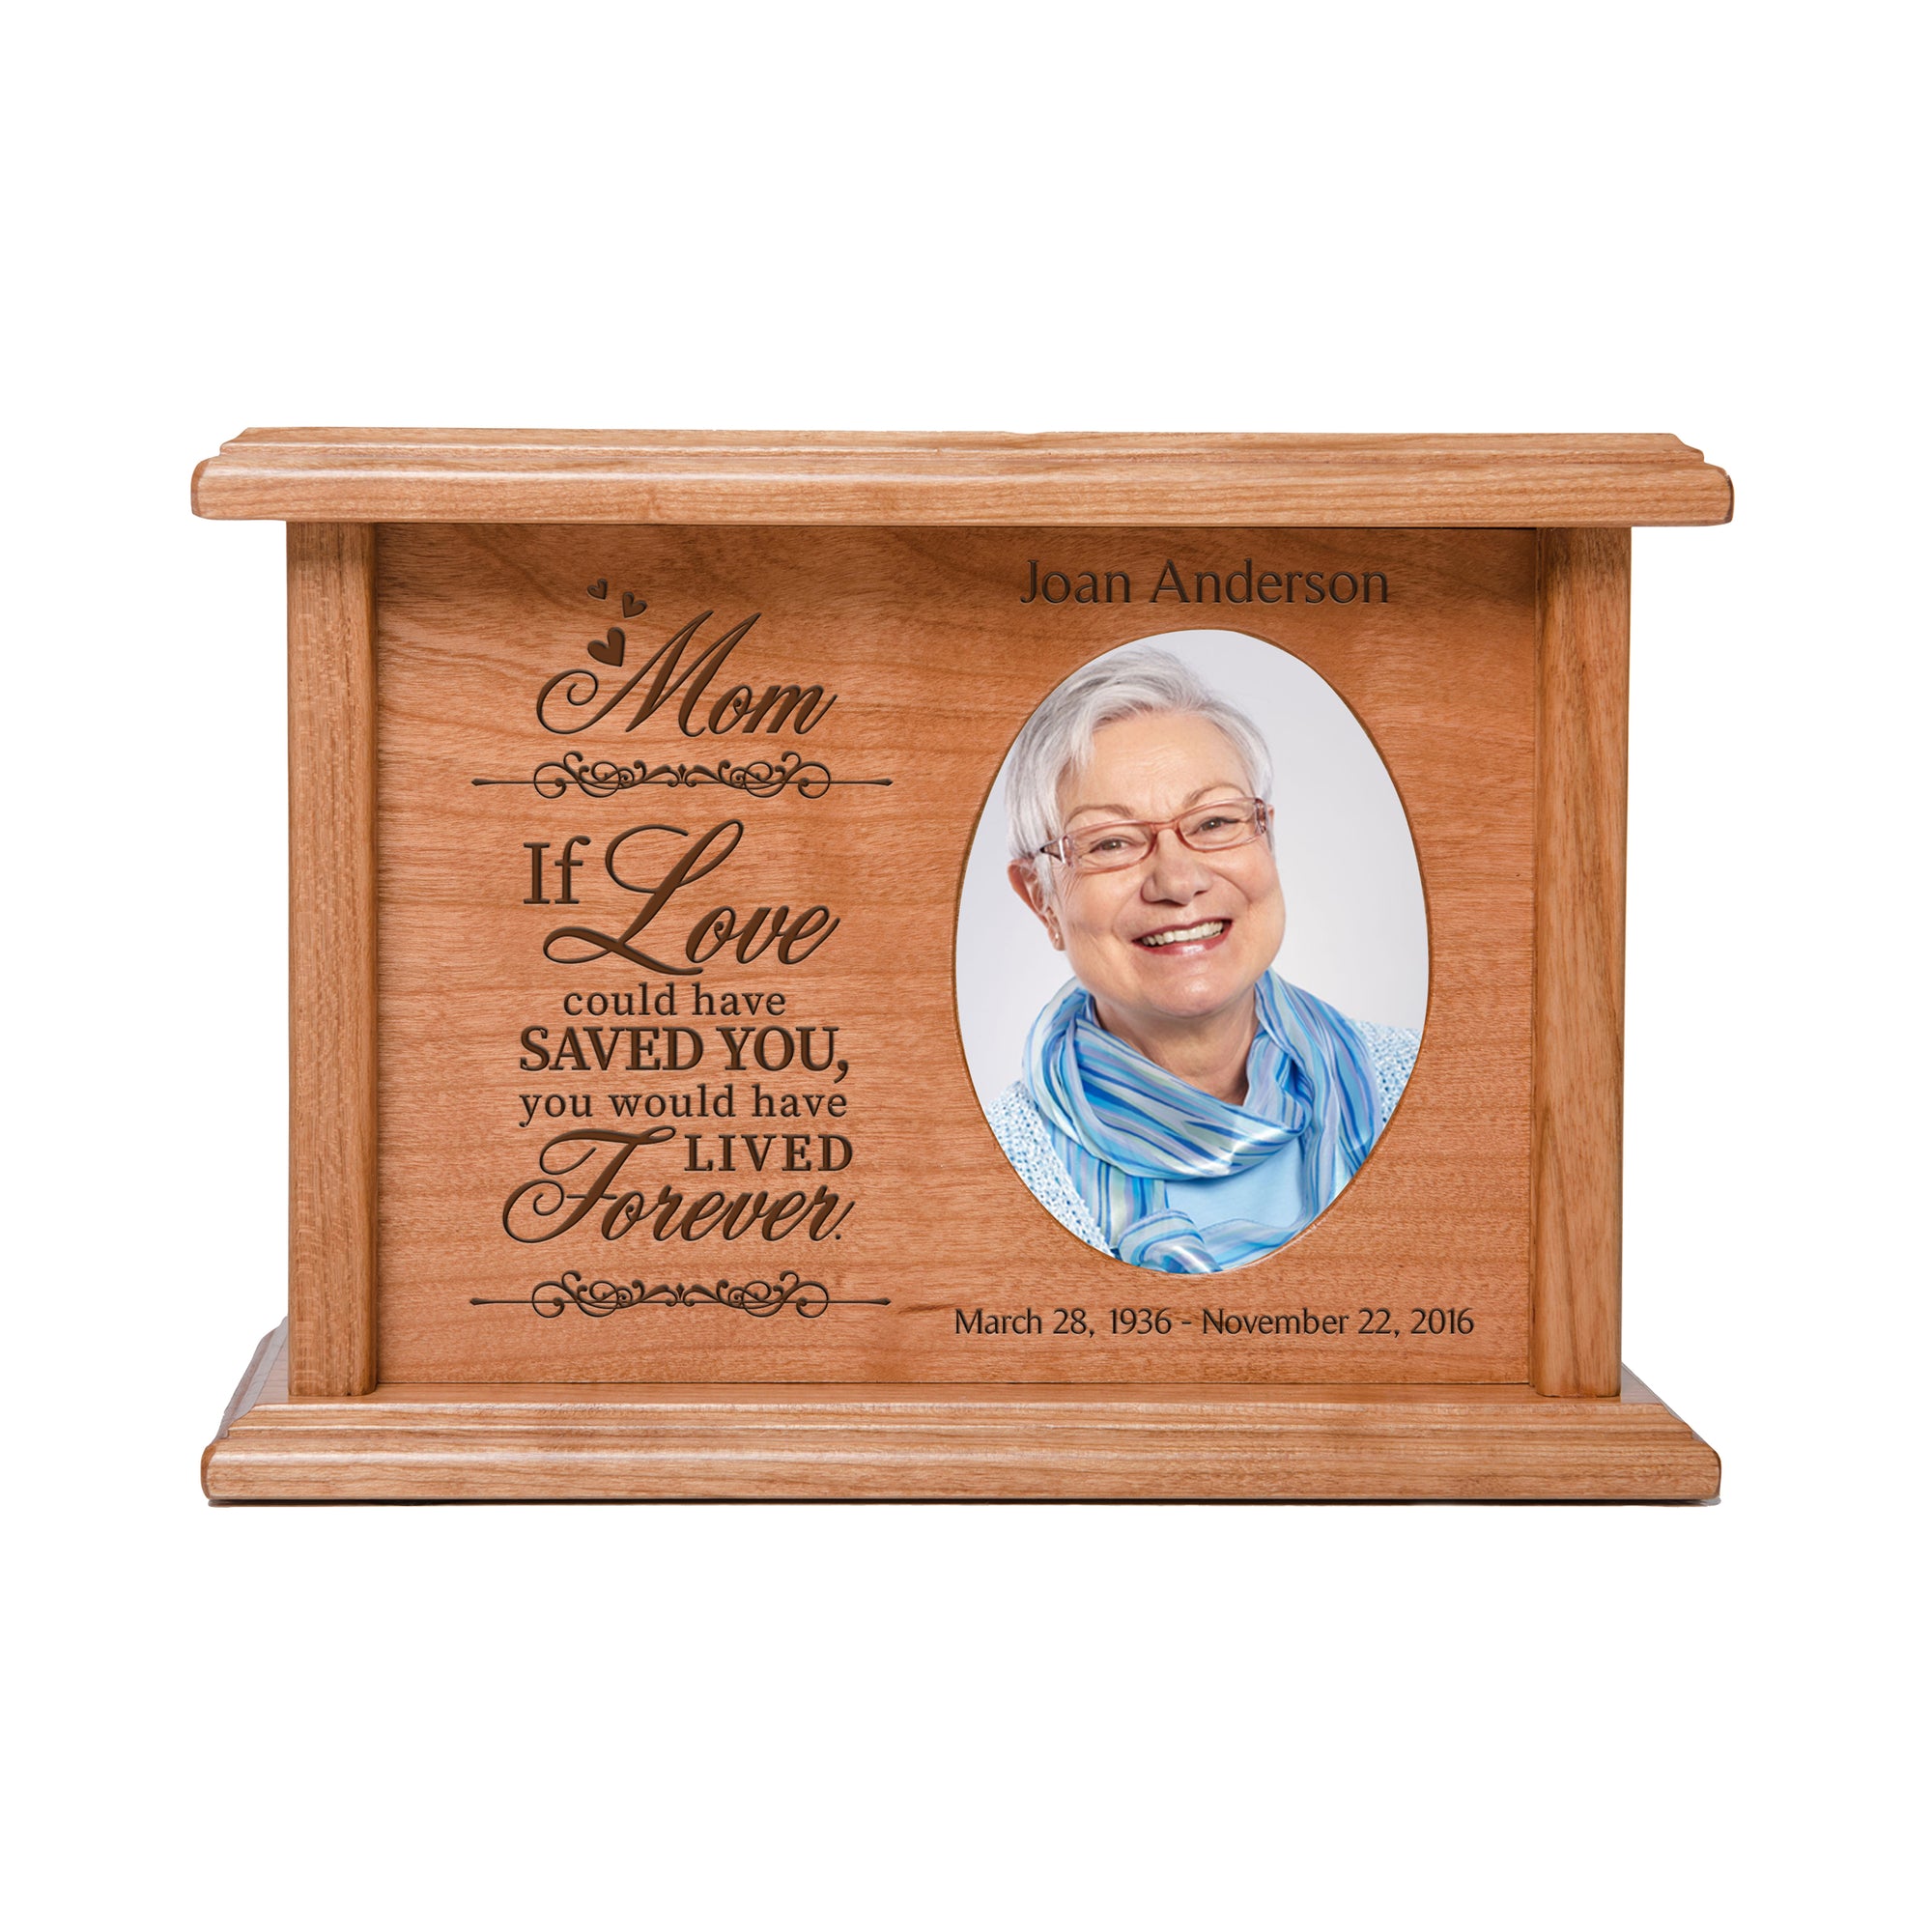 Lifesong Memorials Custom Memorial Urn Box holds 2x3 photo and 65 cu in Mom, If Love Could. Sympathy Gift for the Loss of a Loved One Bereavement Condolence Sympathy Comfort Keepsake Funeral Decoration. Cremation Urns, urn for ashes, urns for humans, urns for dad, urns for mom, urns for sale, urns for human ashes, Pet keepsake urns, pet urns, cherished urns, small urns, small urns for ashes, Wooden Urns, Wooden Keepsake Urn, Wood Cremation Urns.